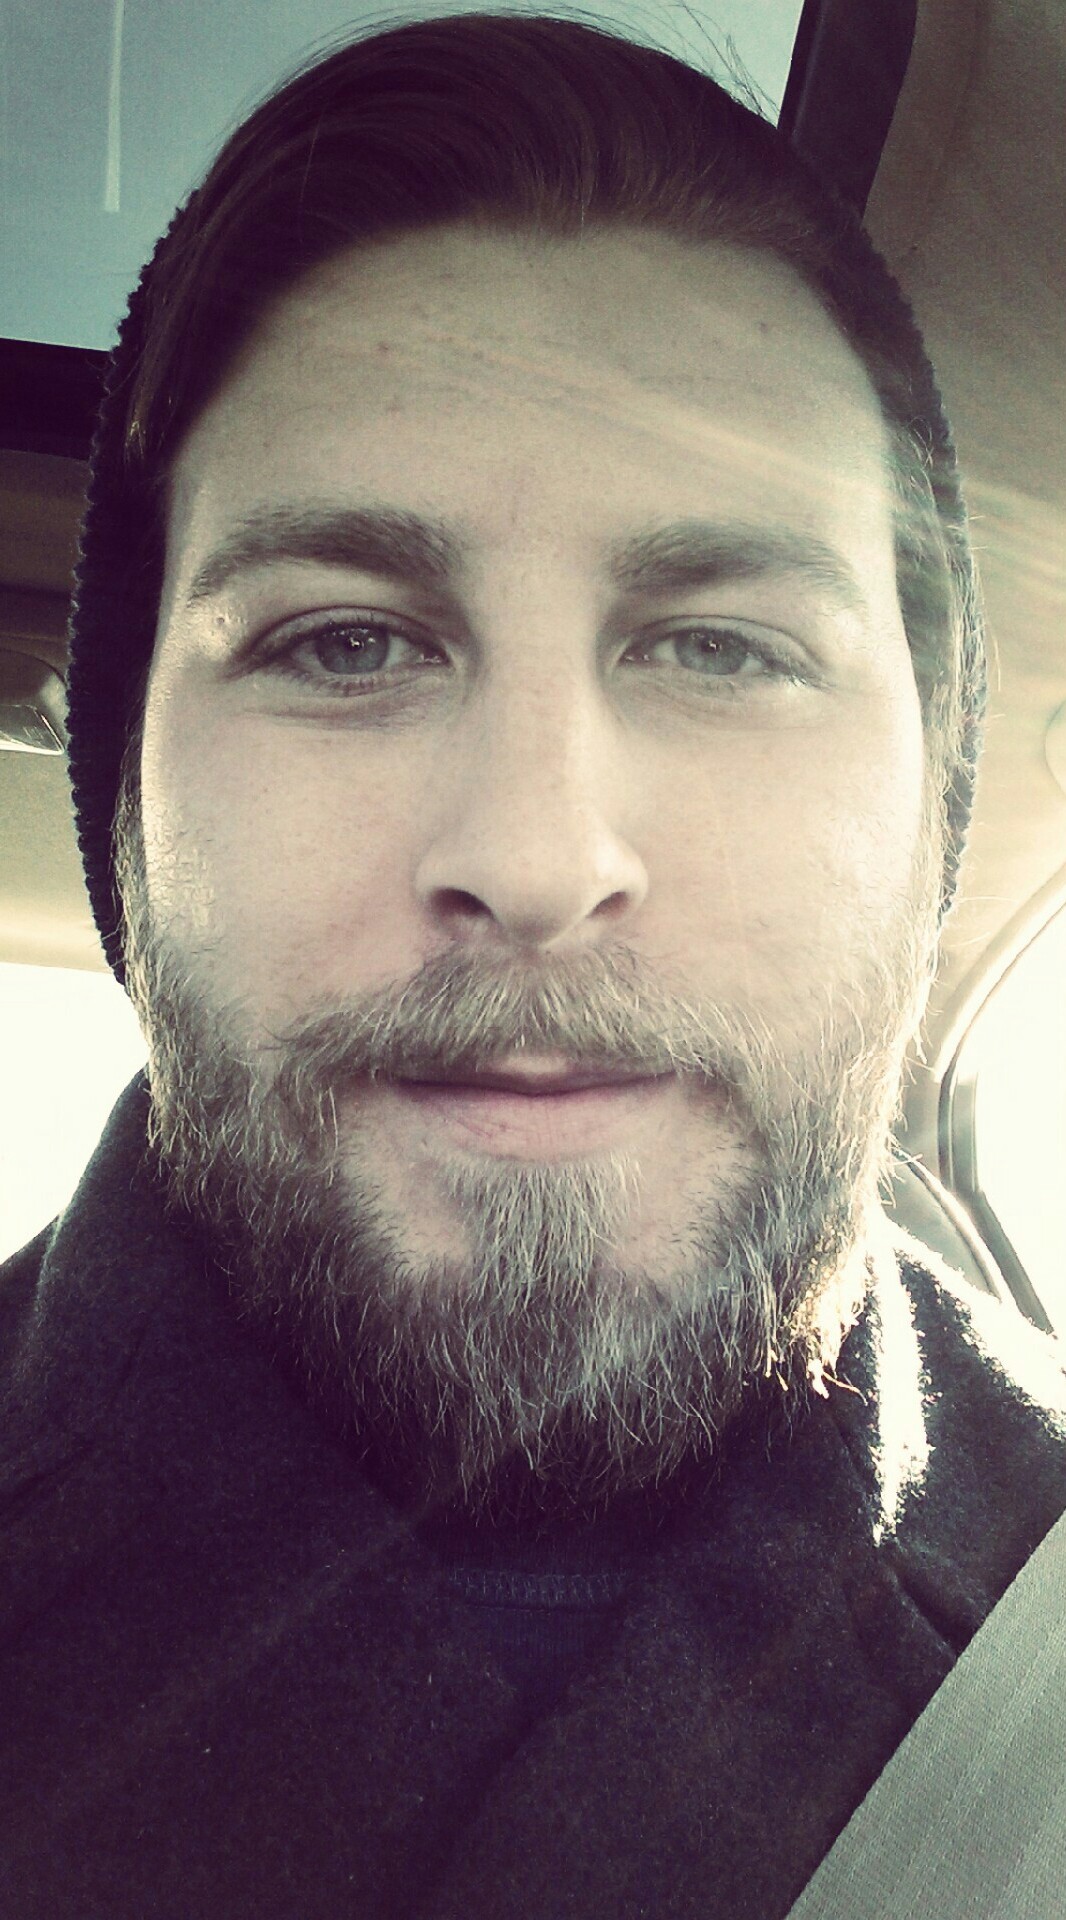 Selfie Of Man With Beard | Beard Pictures | Pictures of Beards ...